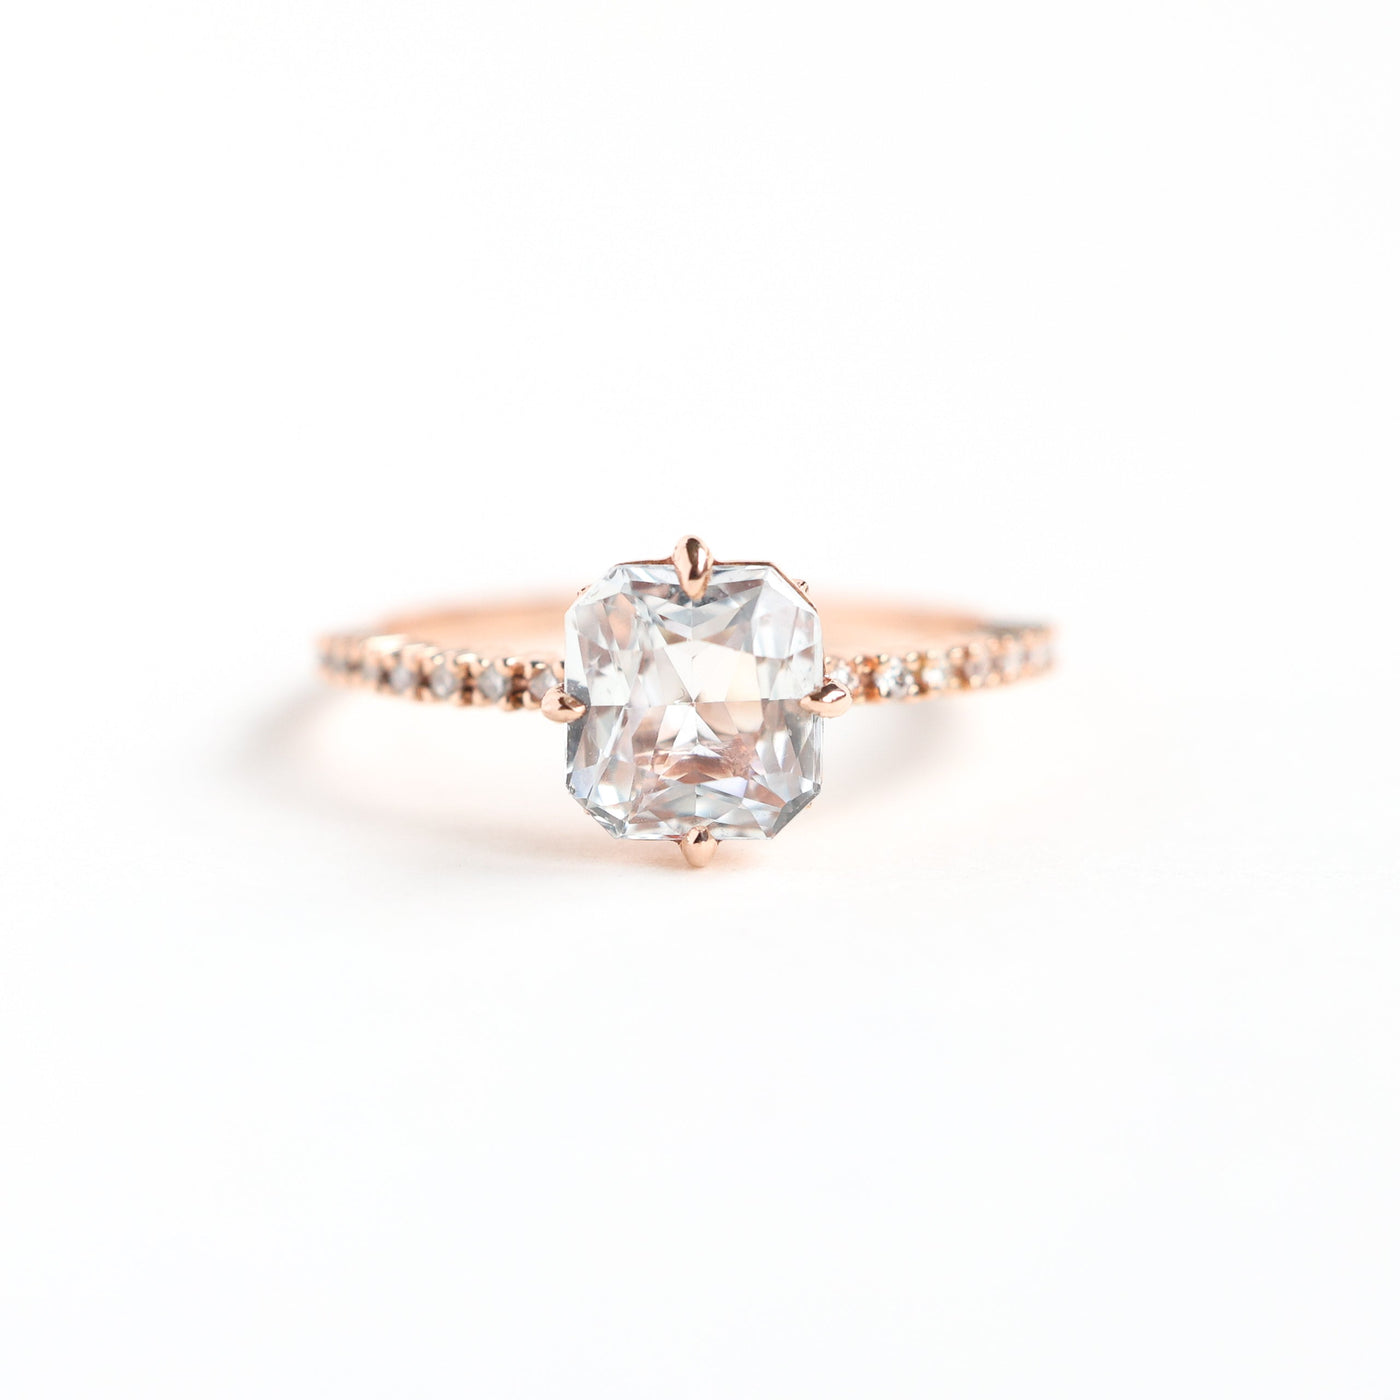 Radiant white sapphire ring with side diamonds